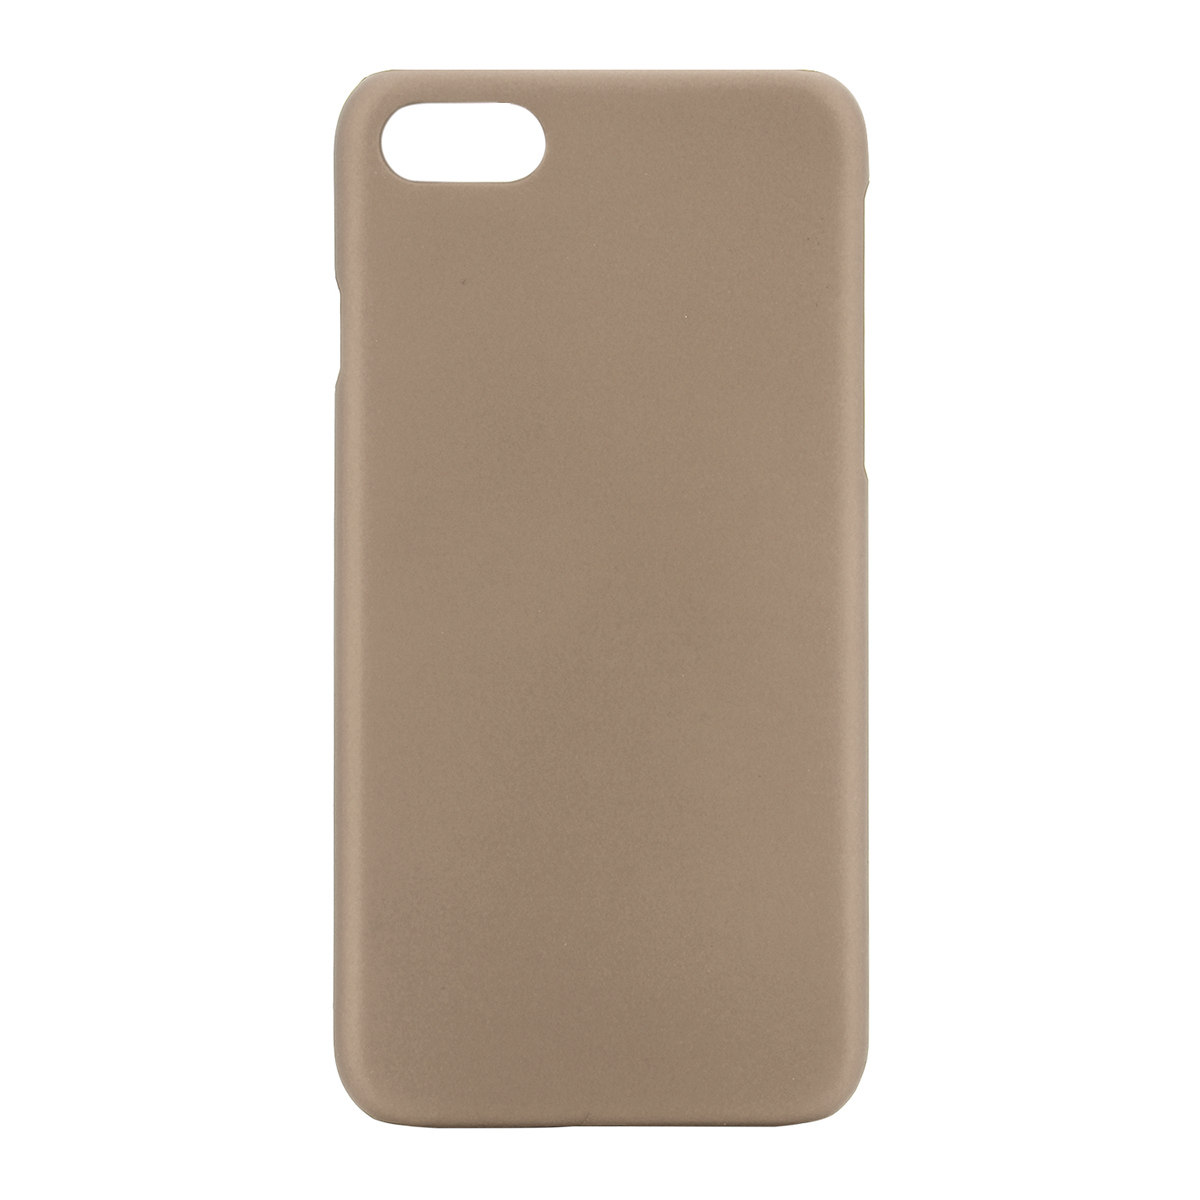 Multicolor Frosted Hard PC Protective Back Phone Case for iPhone 6s - Gold